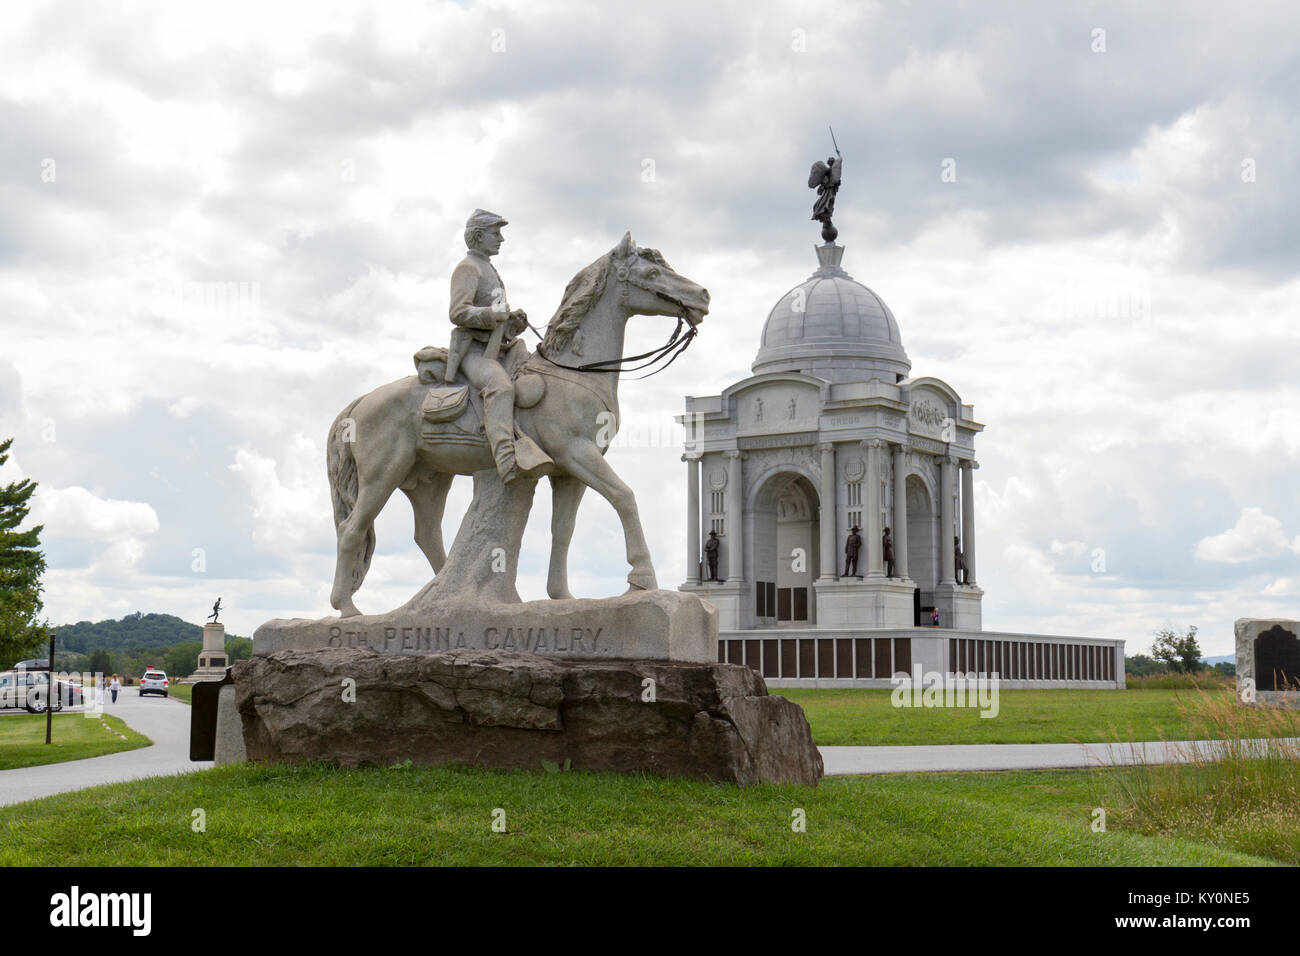 Monument to the 8th Pennsylvania Cavalry and the State of Pennsylvania Monument, Gettysburg National Military Park, Pennsylvania, United States. Stock Photo